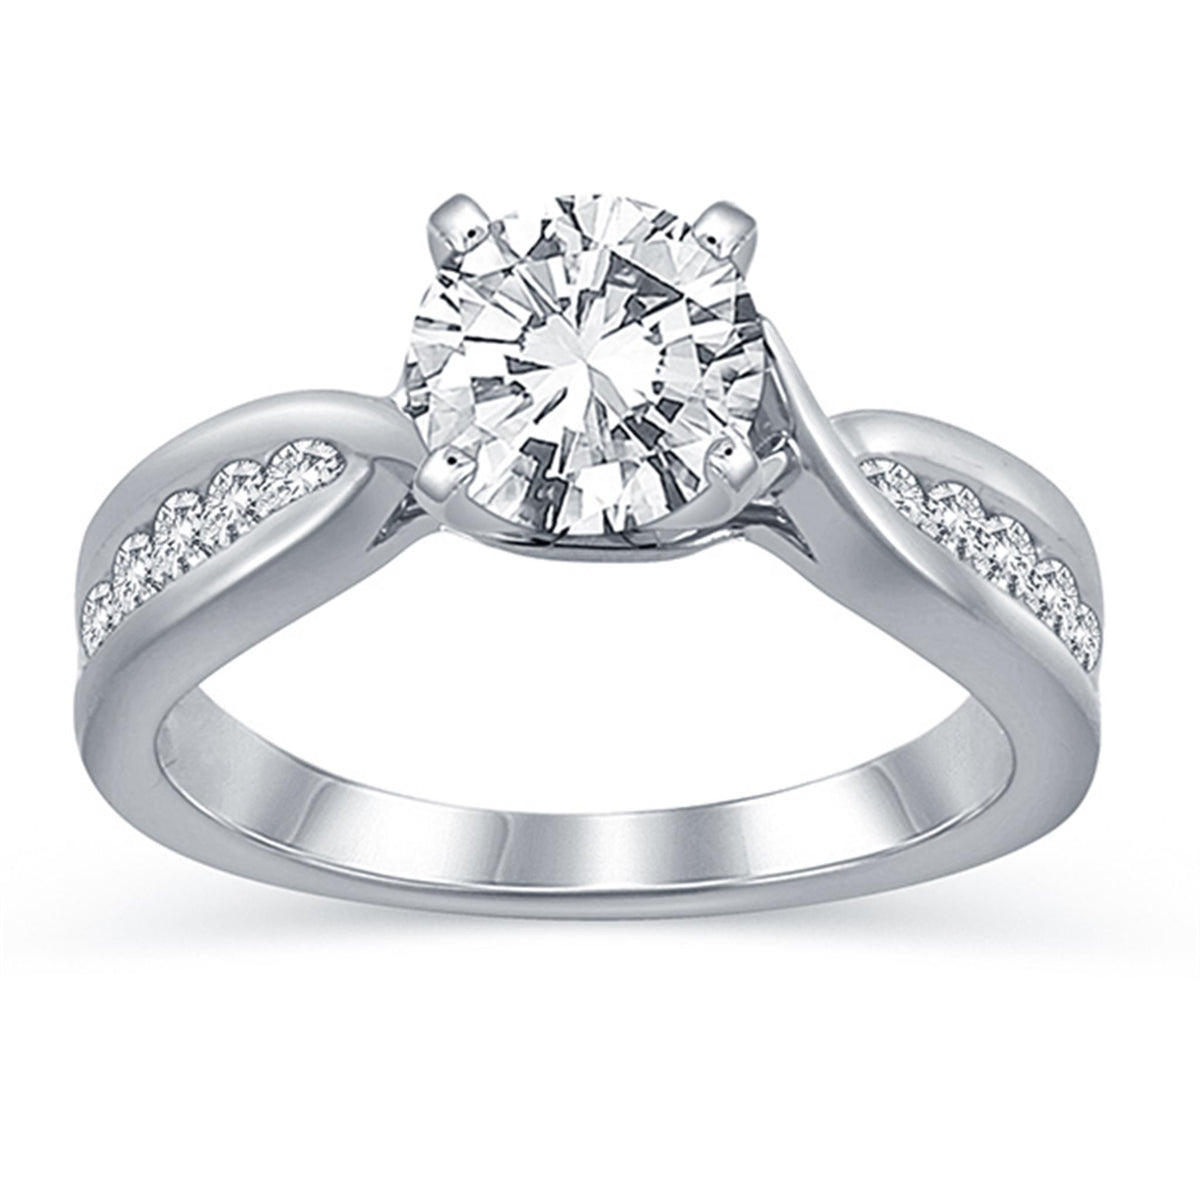 14Kt White Gold Channel Set Engagement Ring Mounting With 0.33cttw Natural Diamonds